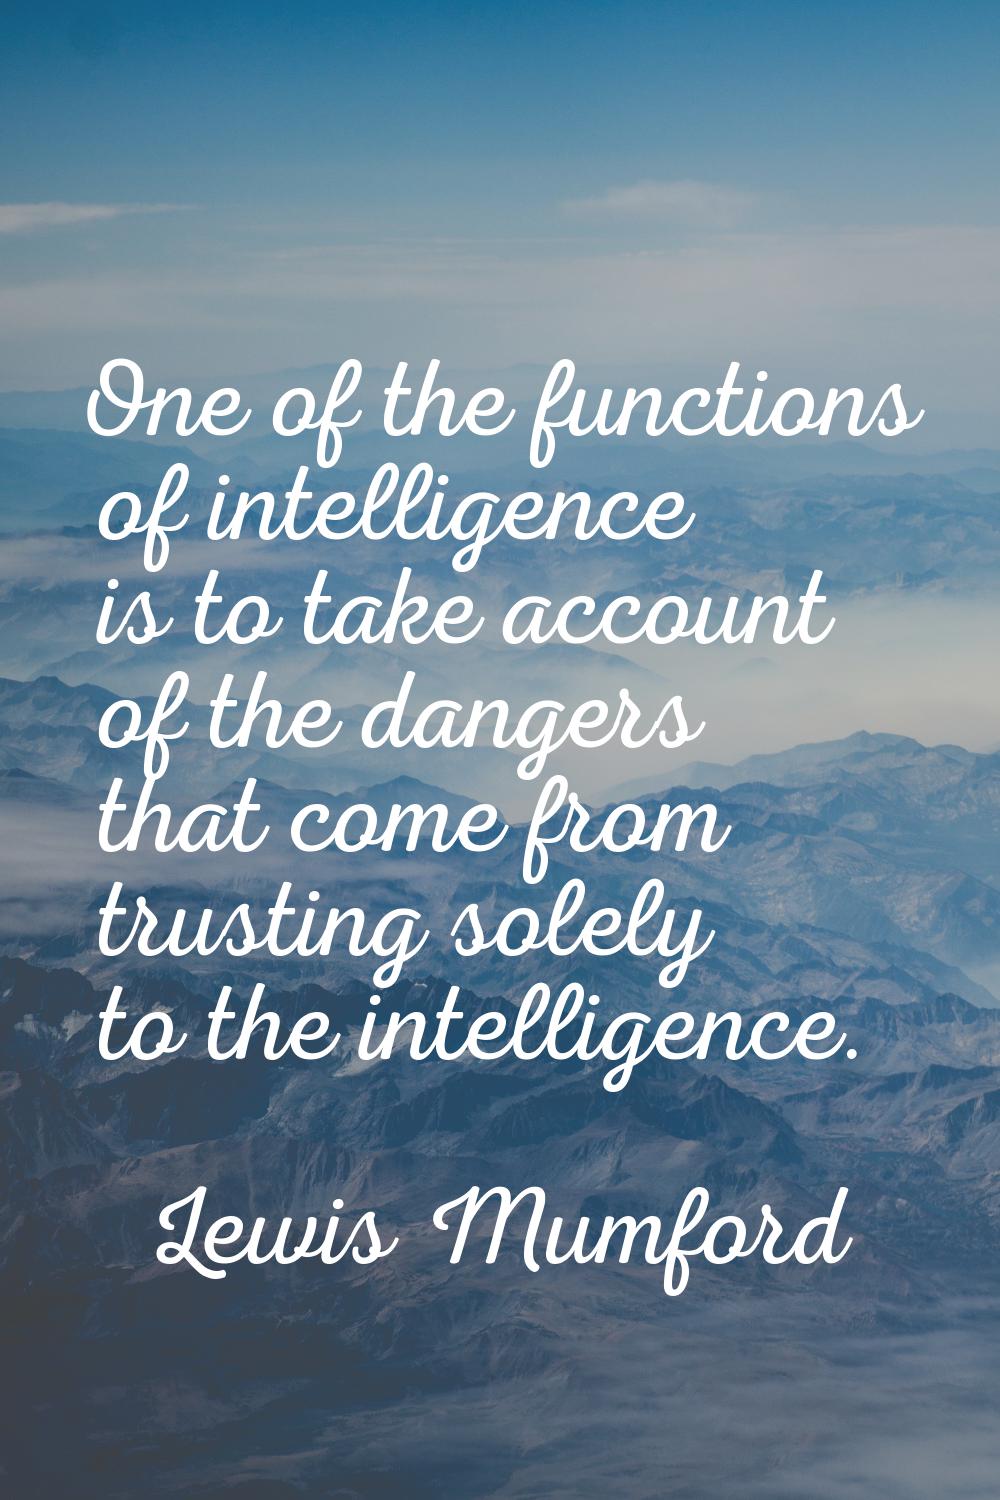 One of the functions of intelligence is to take account of the dangers that come from trusting sole